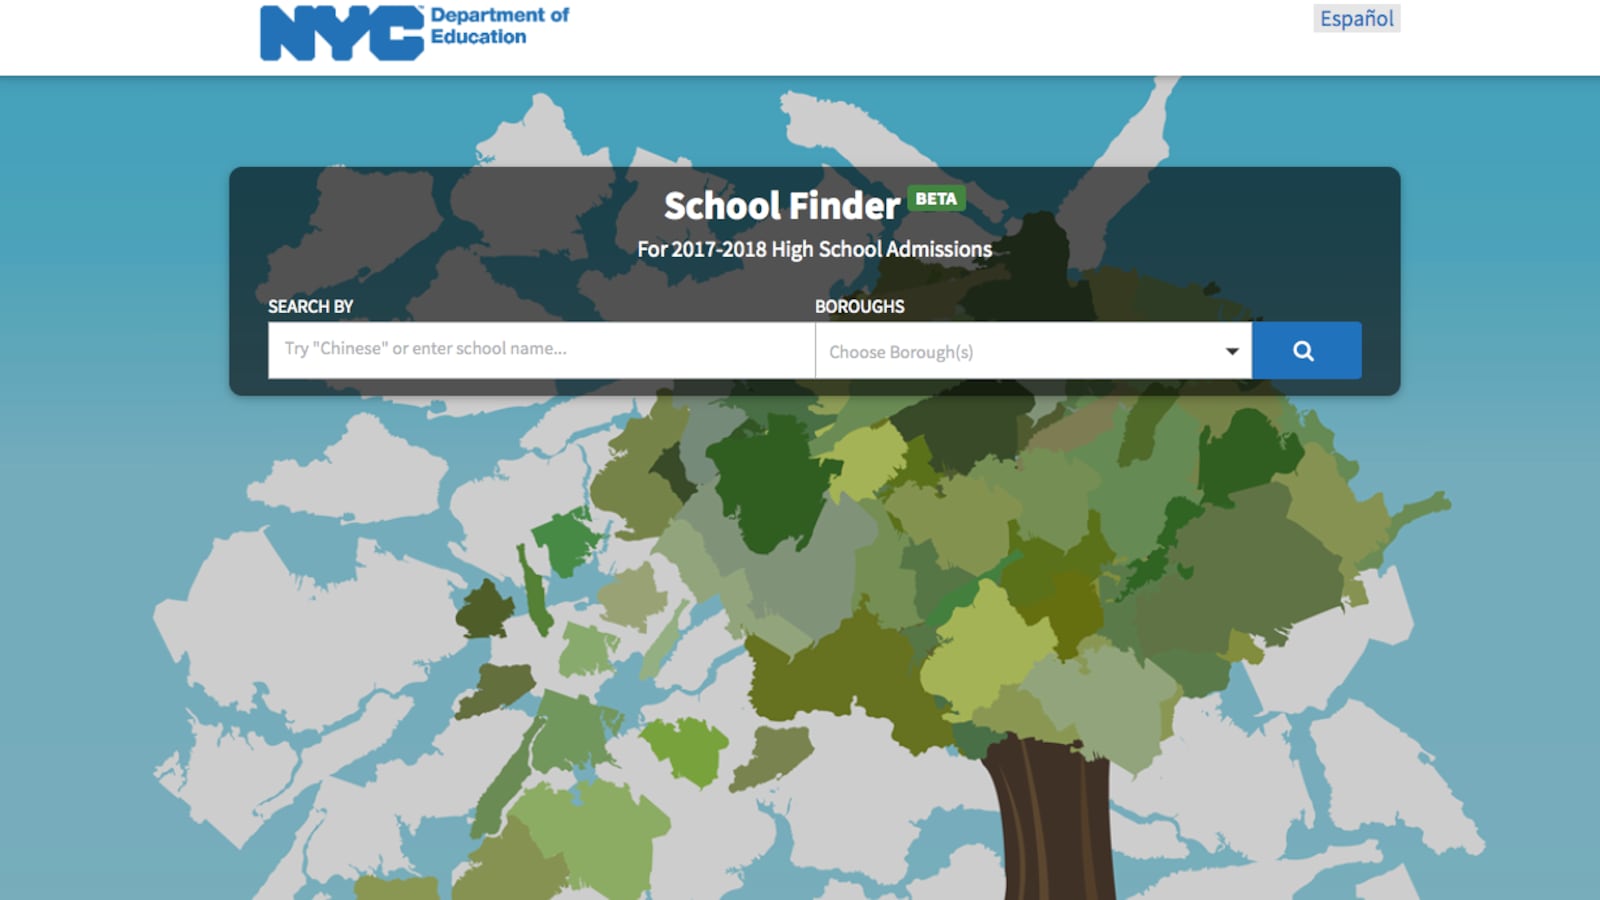 "School Finder" is the Department of Education's new, interactive high school directory.